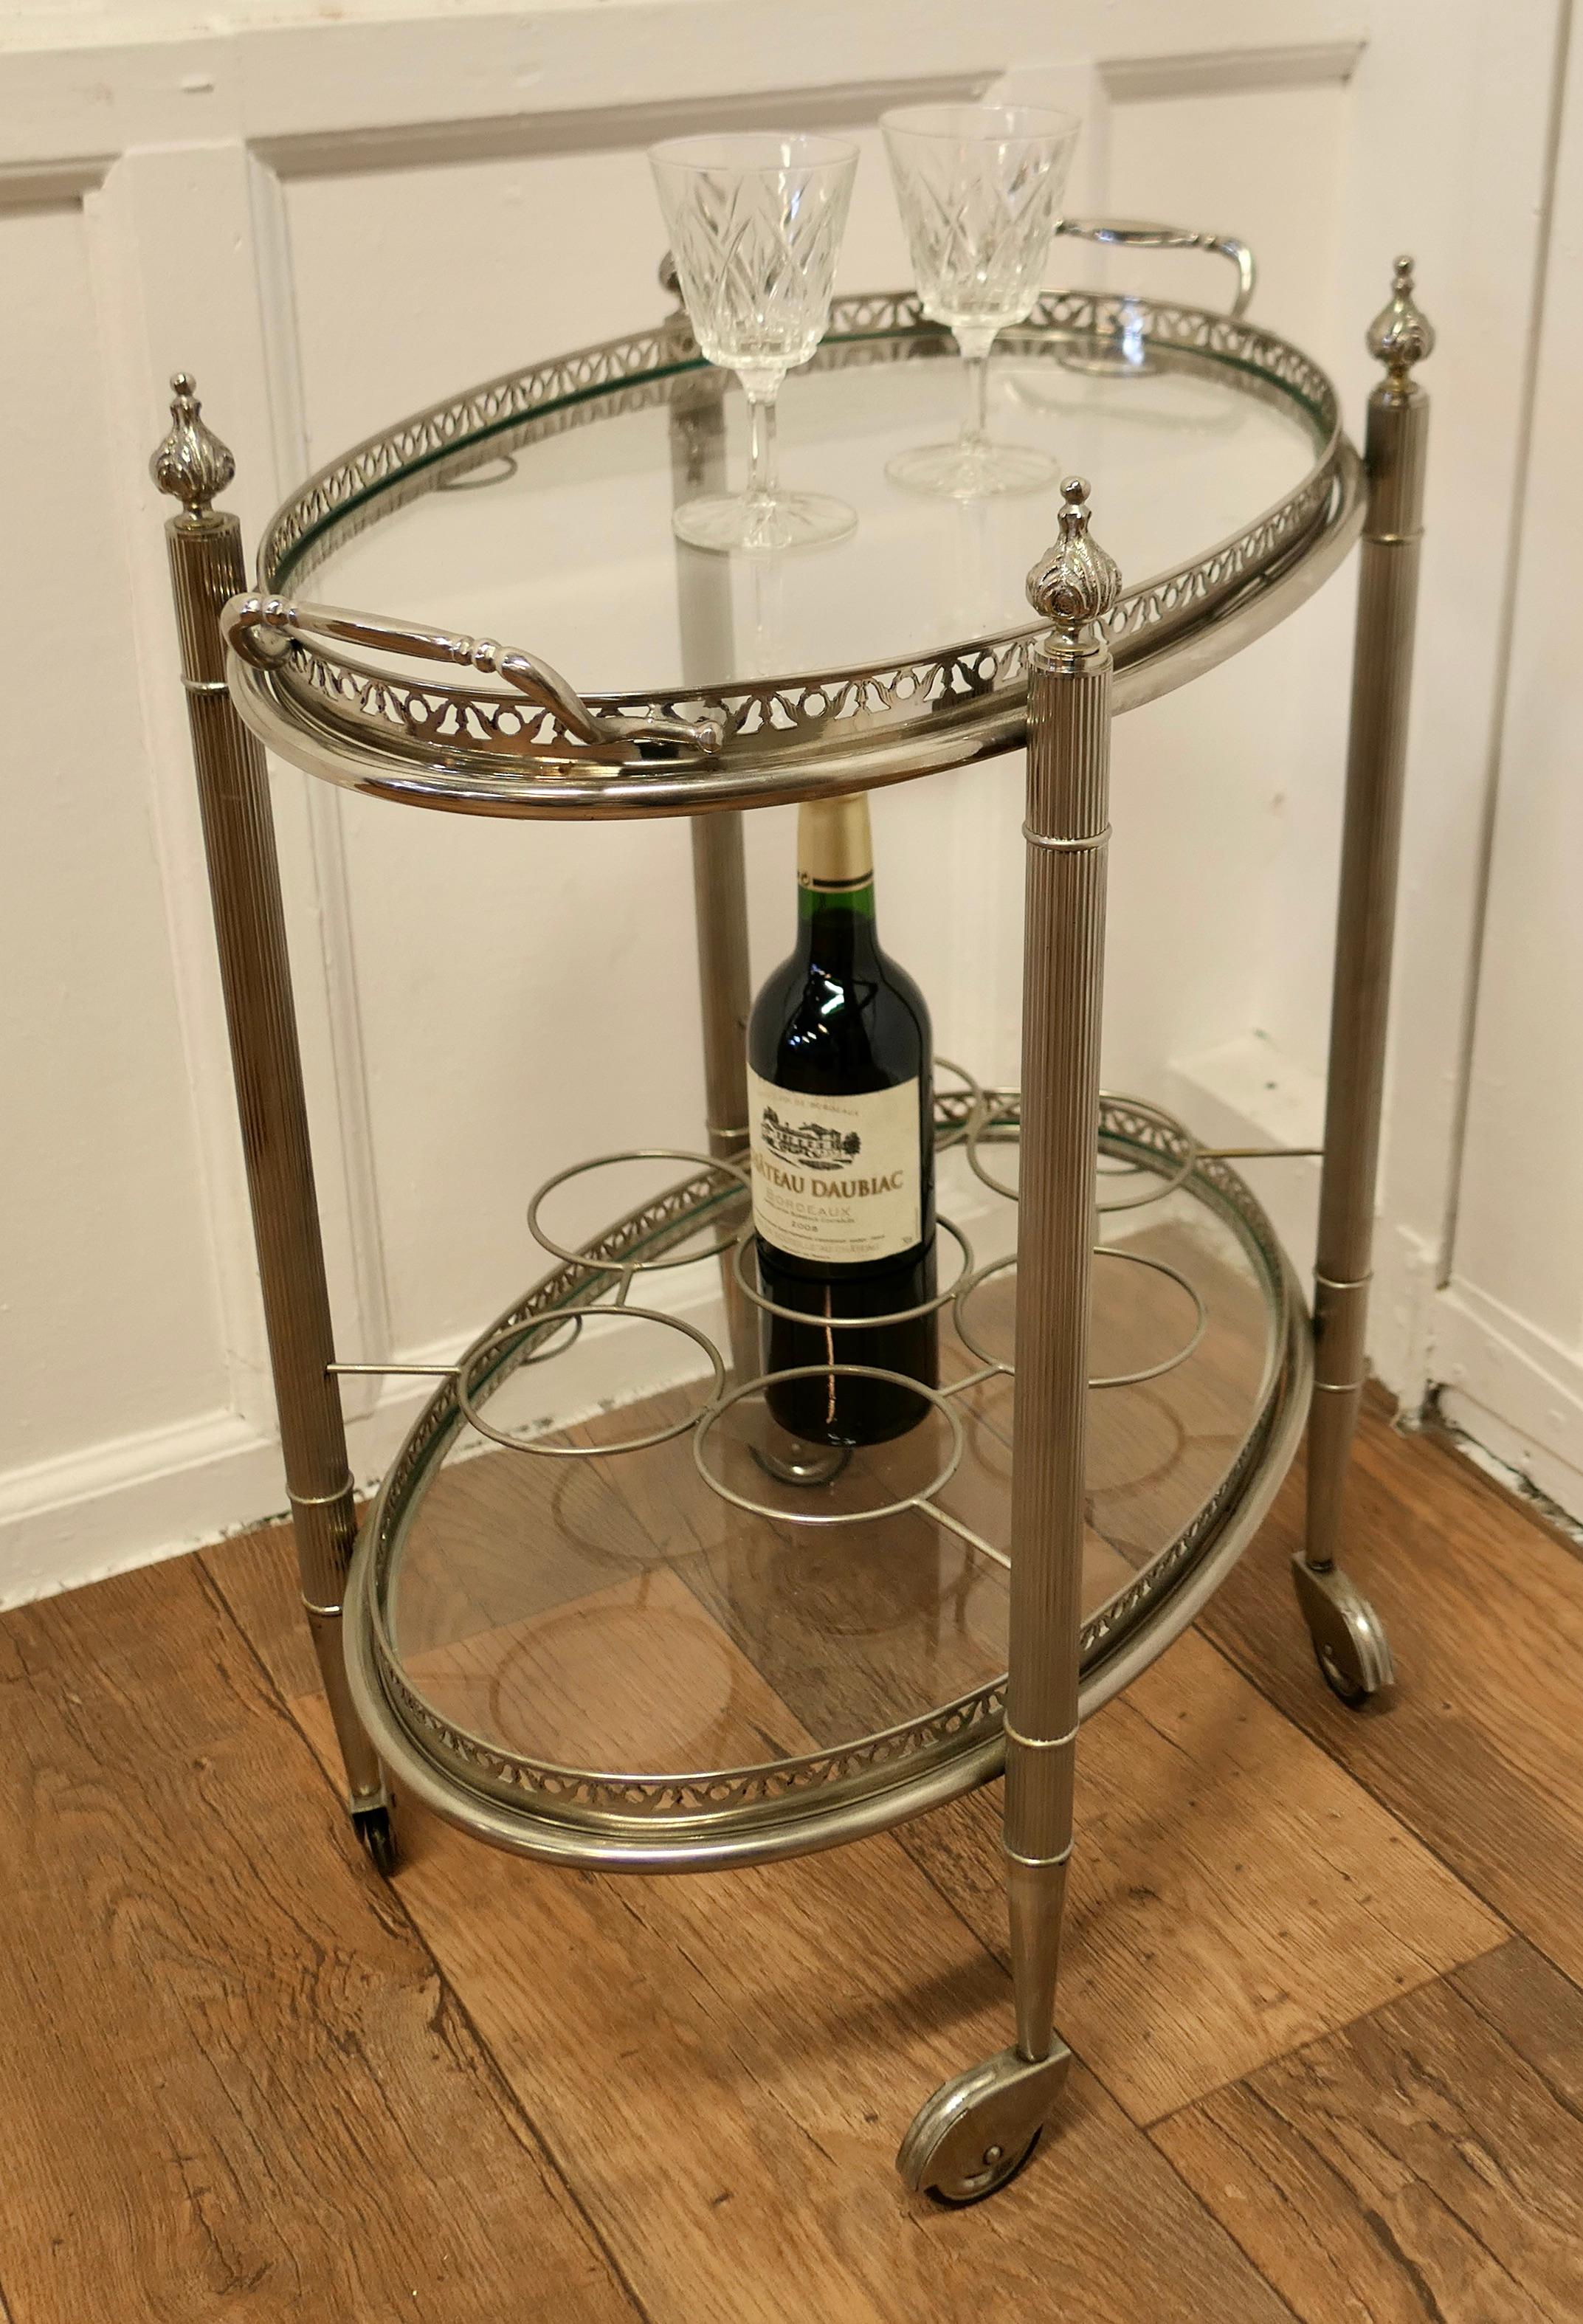 Vintage Art Deco Silver Drinks Trolley with Glass Tray a Very Decorative Piece 9